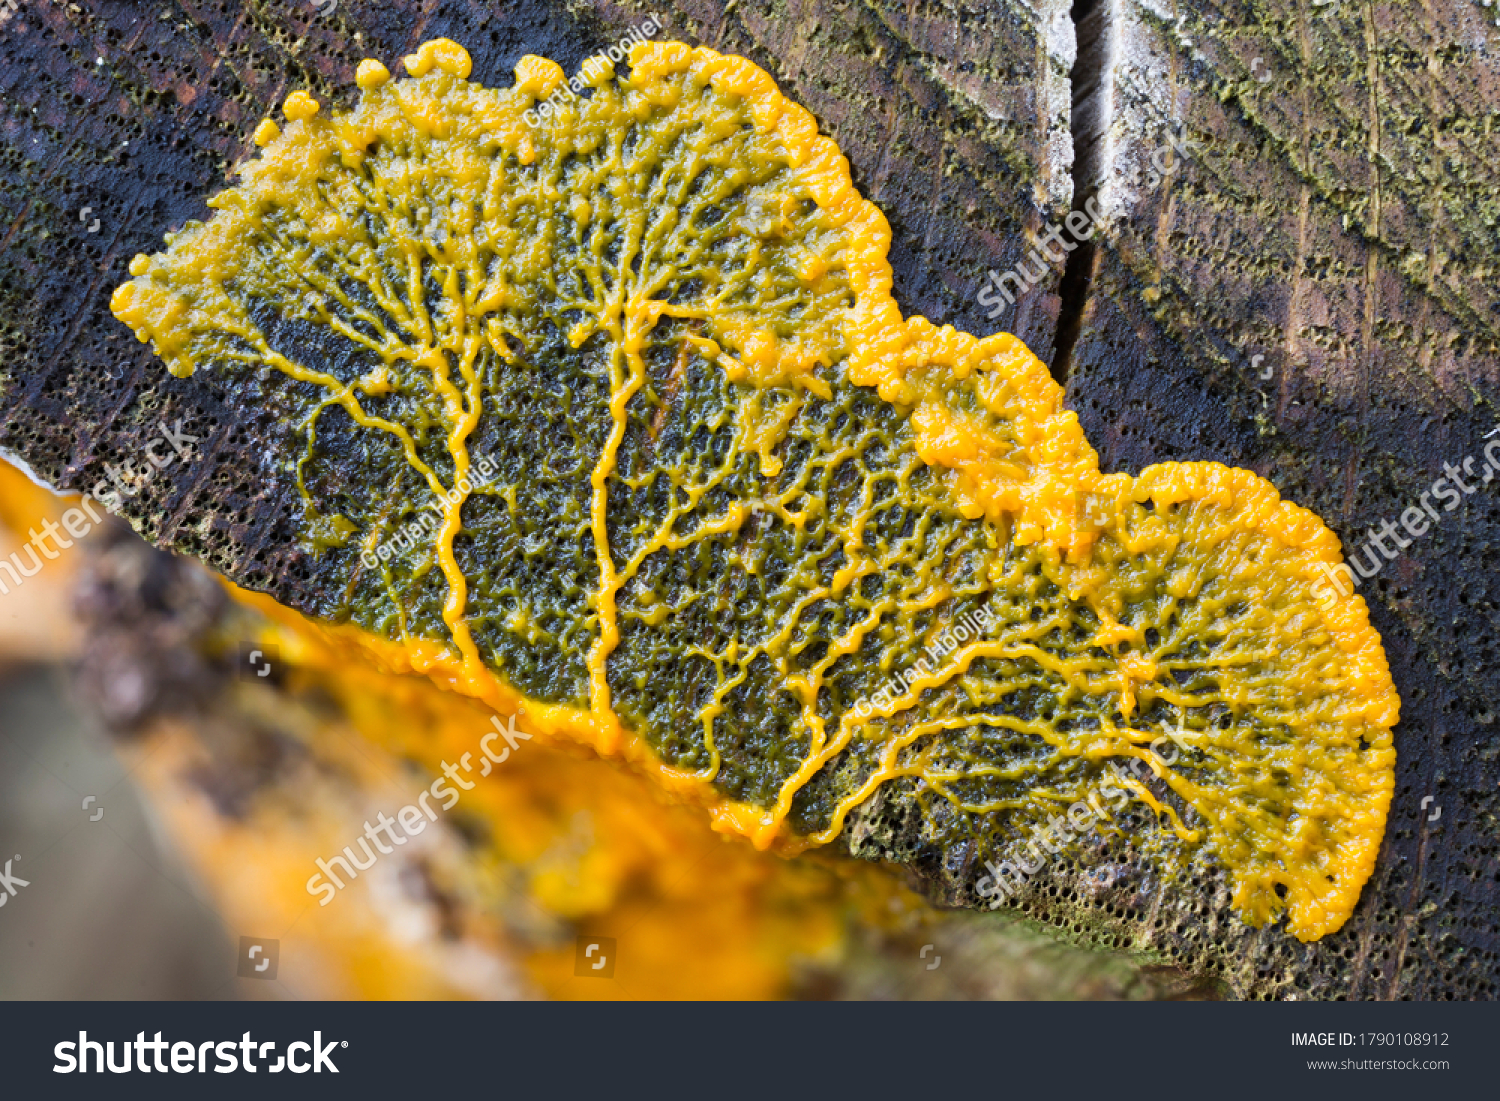 Migrating plasmodium of Badhamia utricularis slime mold on a tree trunk (Baarn, the Netherlands) #1790108912